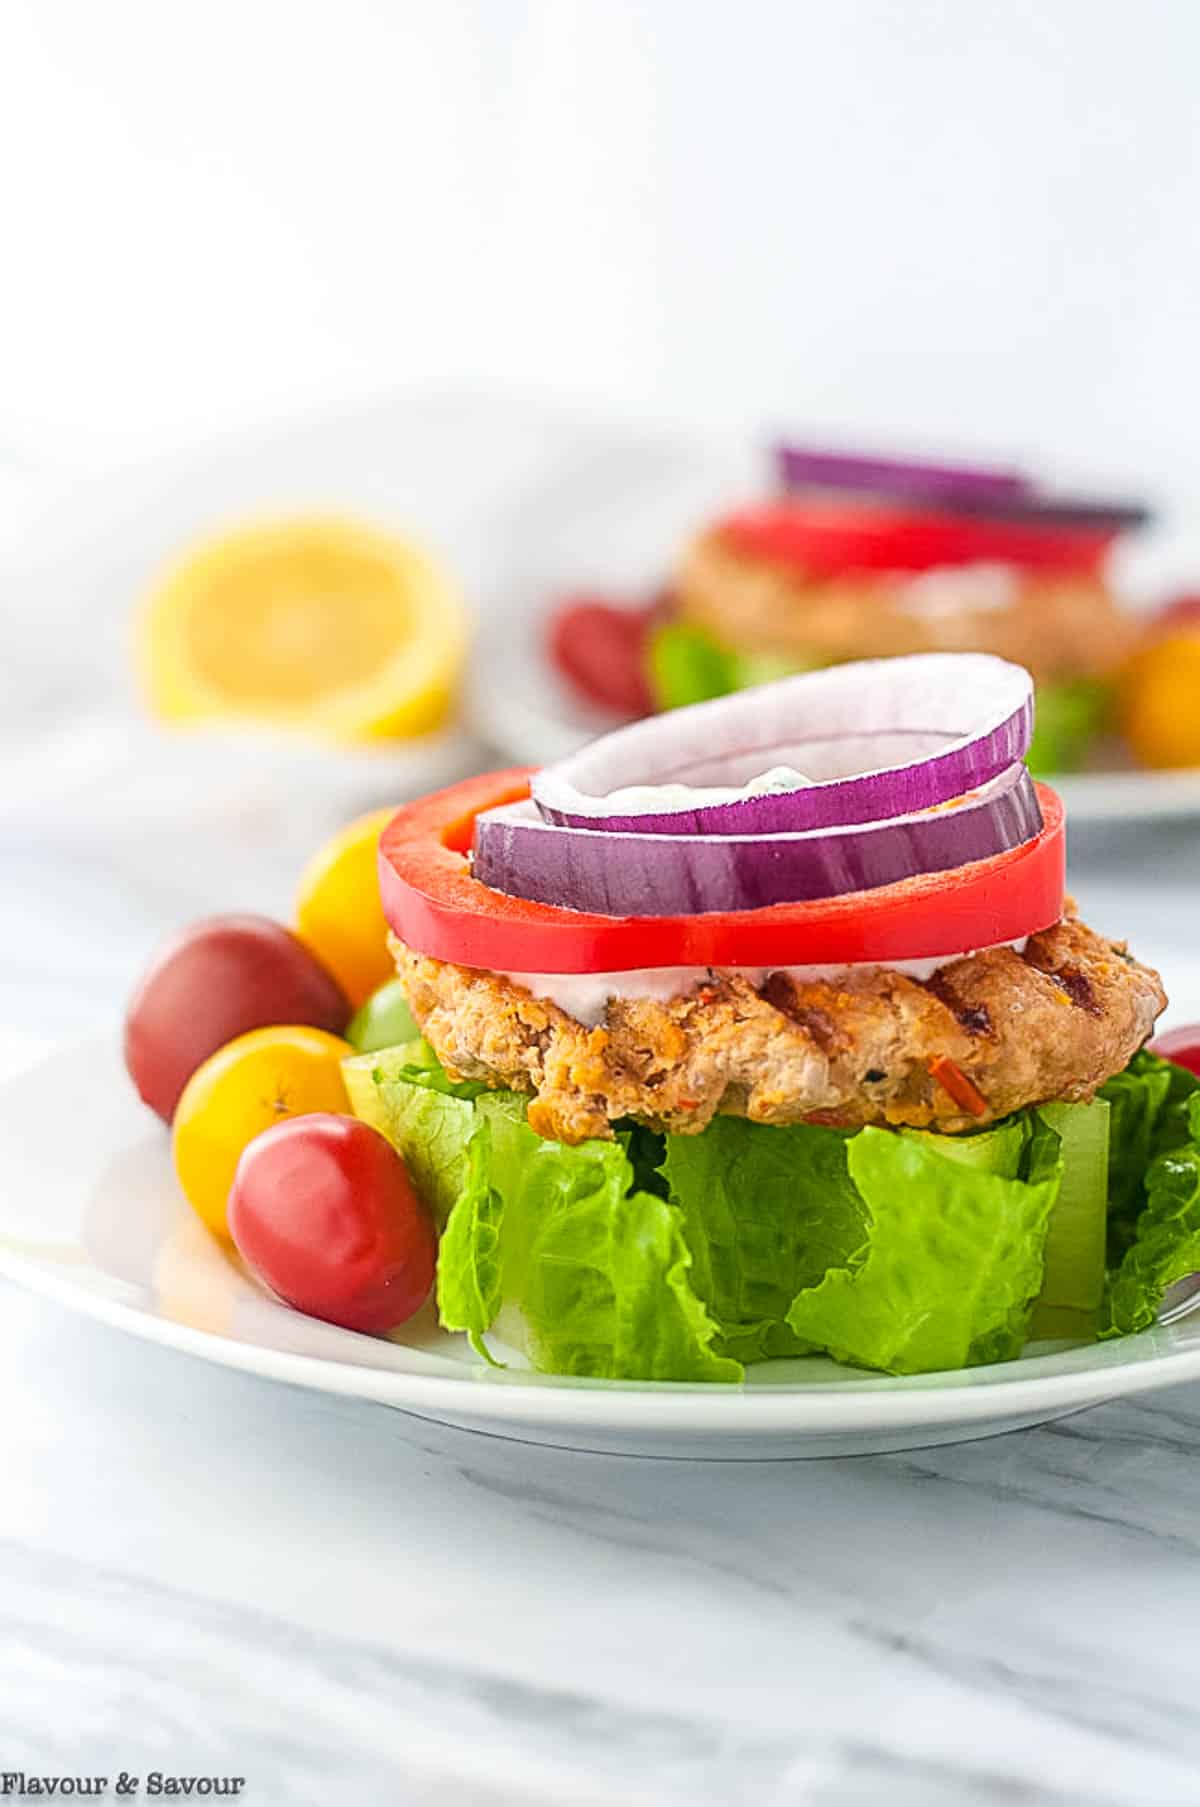 Harissa chicken burger topped with tomato and red onion.